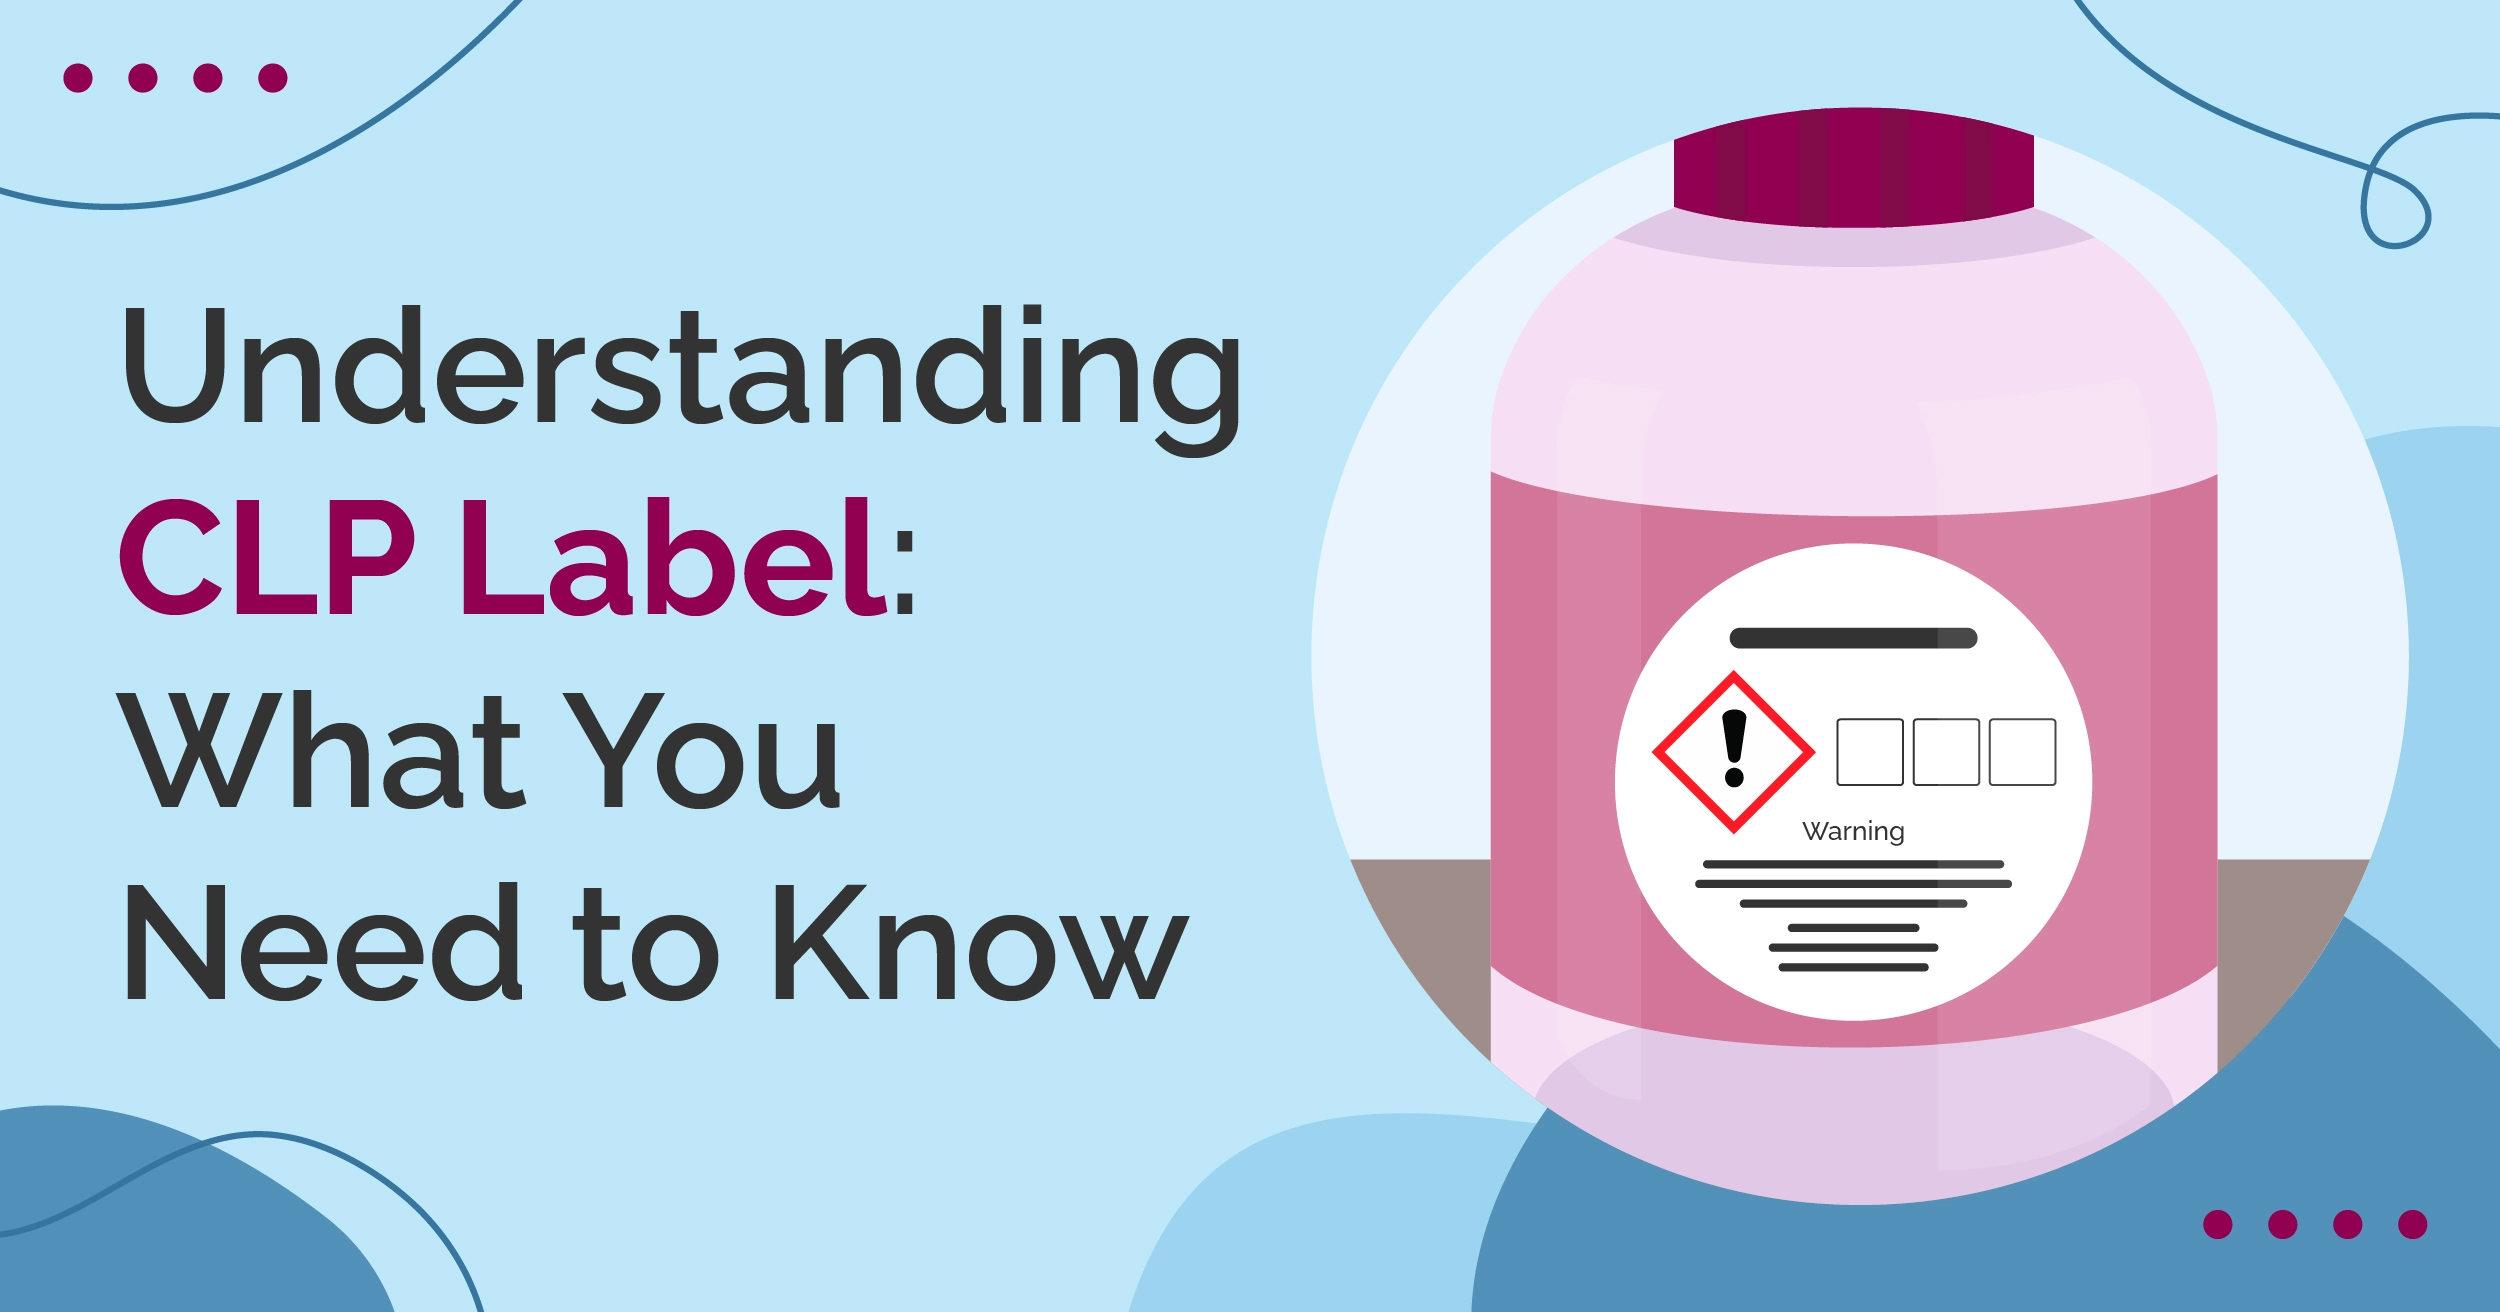 Understanding CLP Label: What You Need to Know